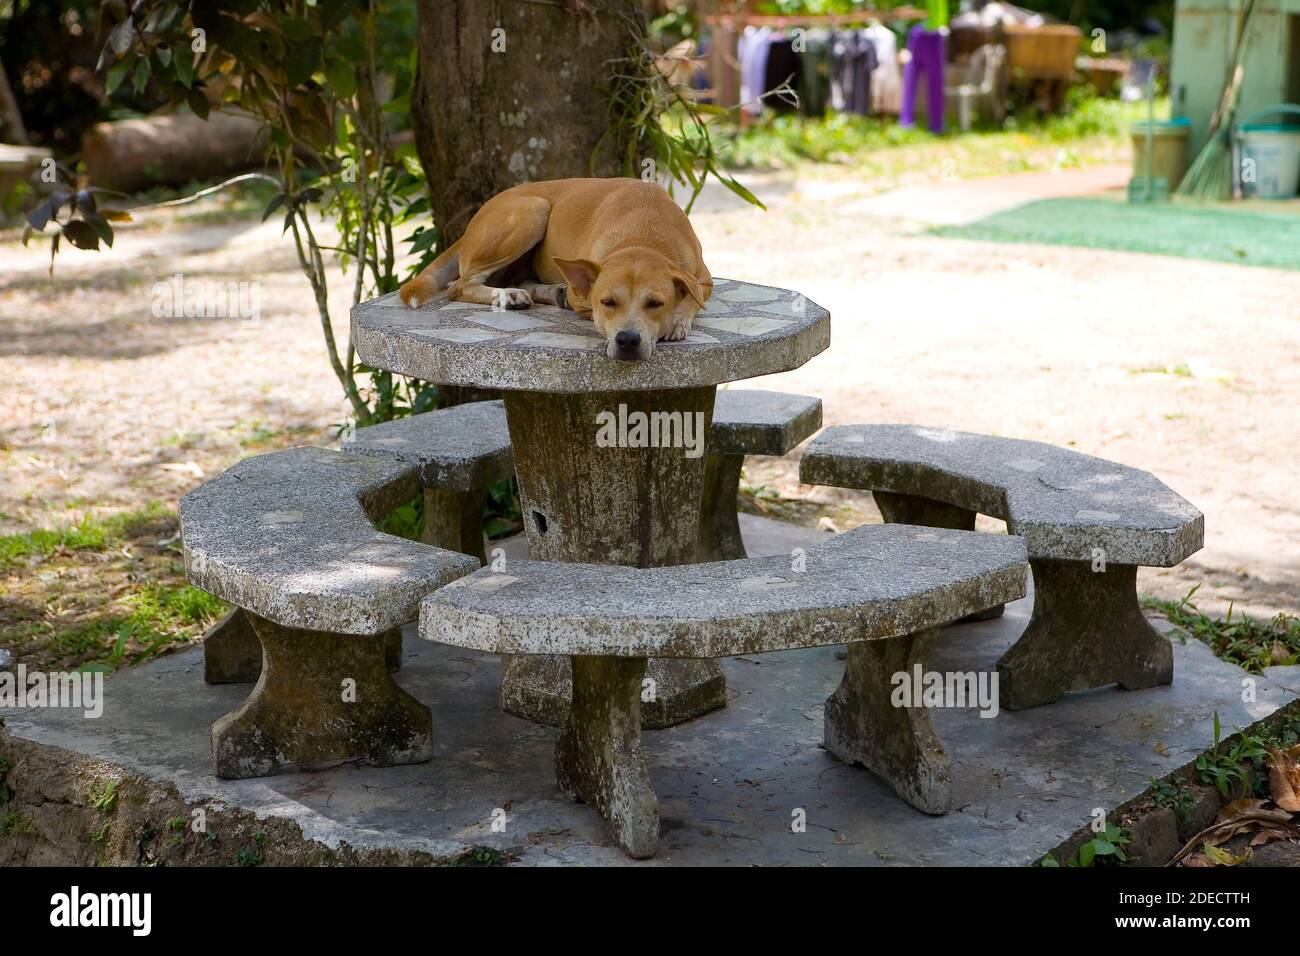 A large red dog in a collar sleeps on a stone table. Outdoors. Stock Photo